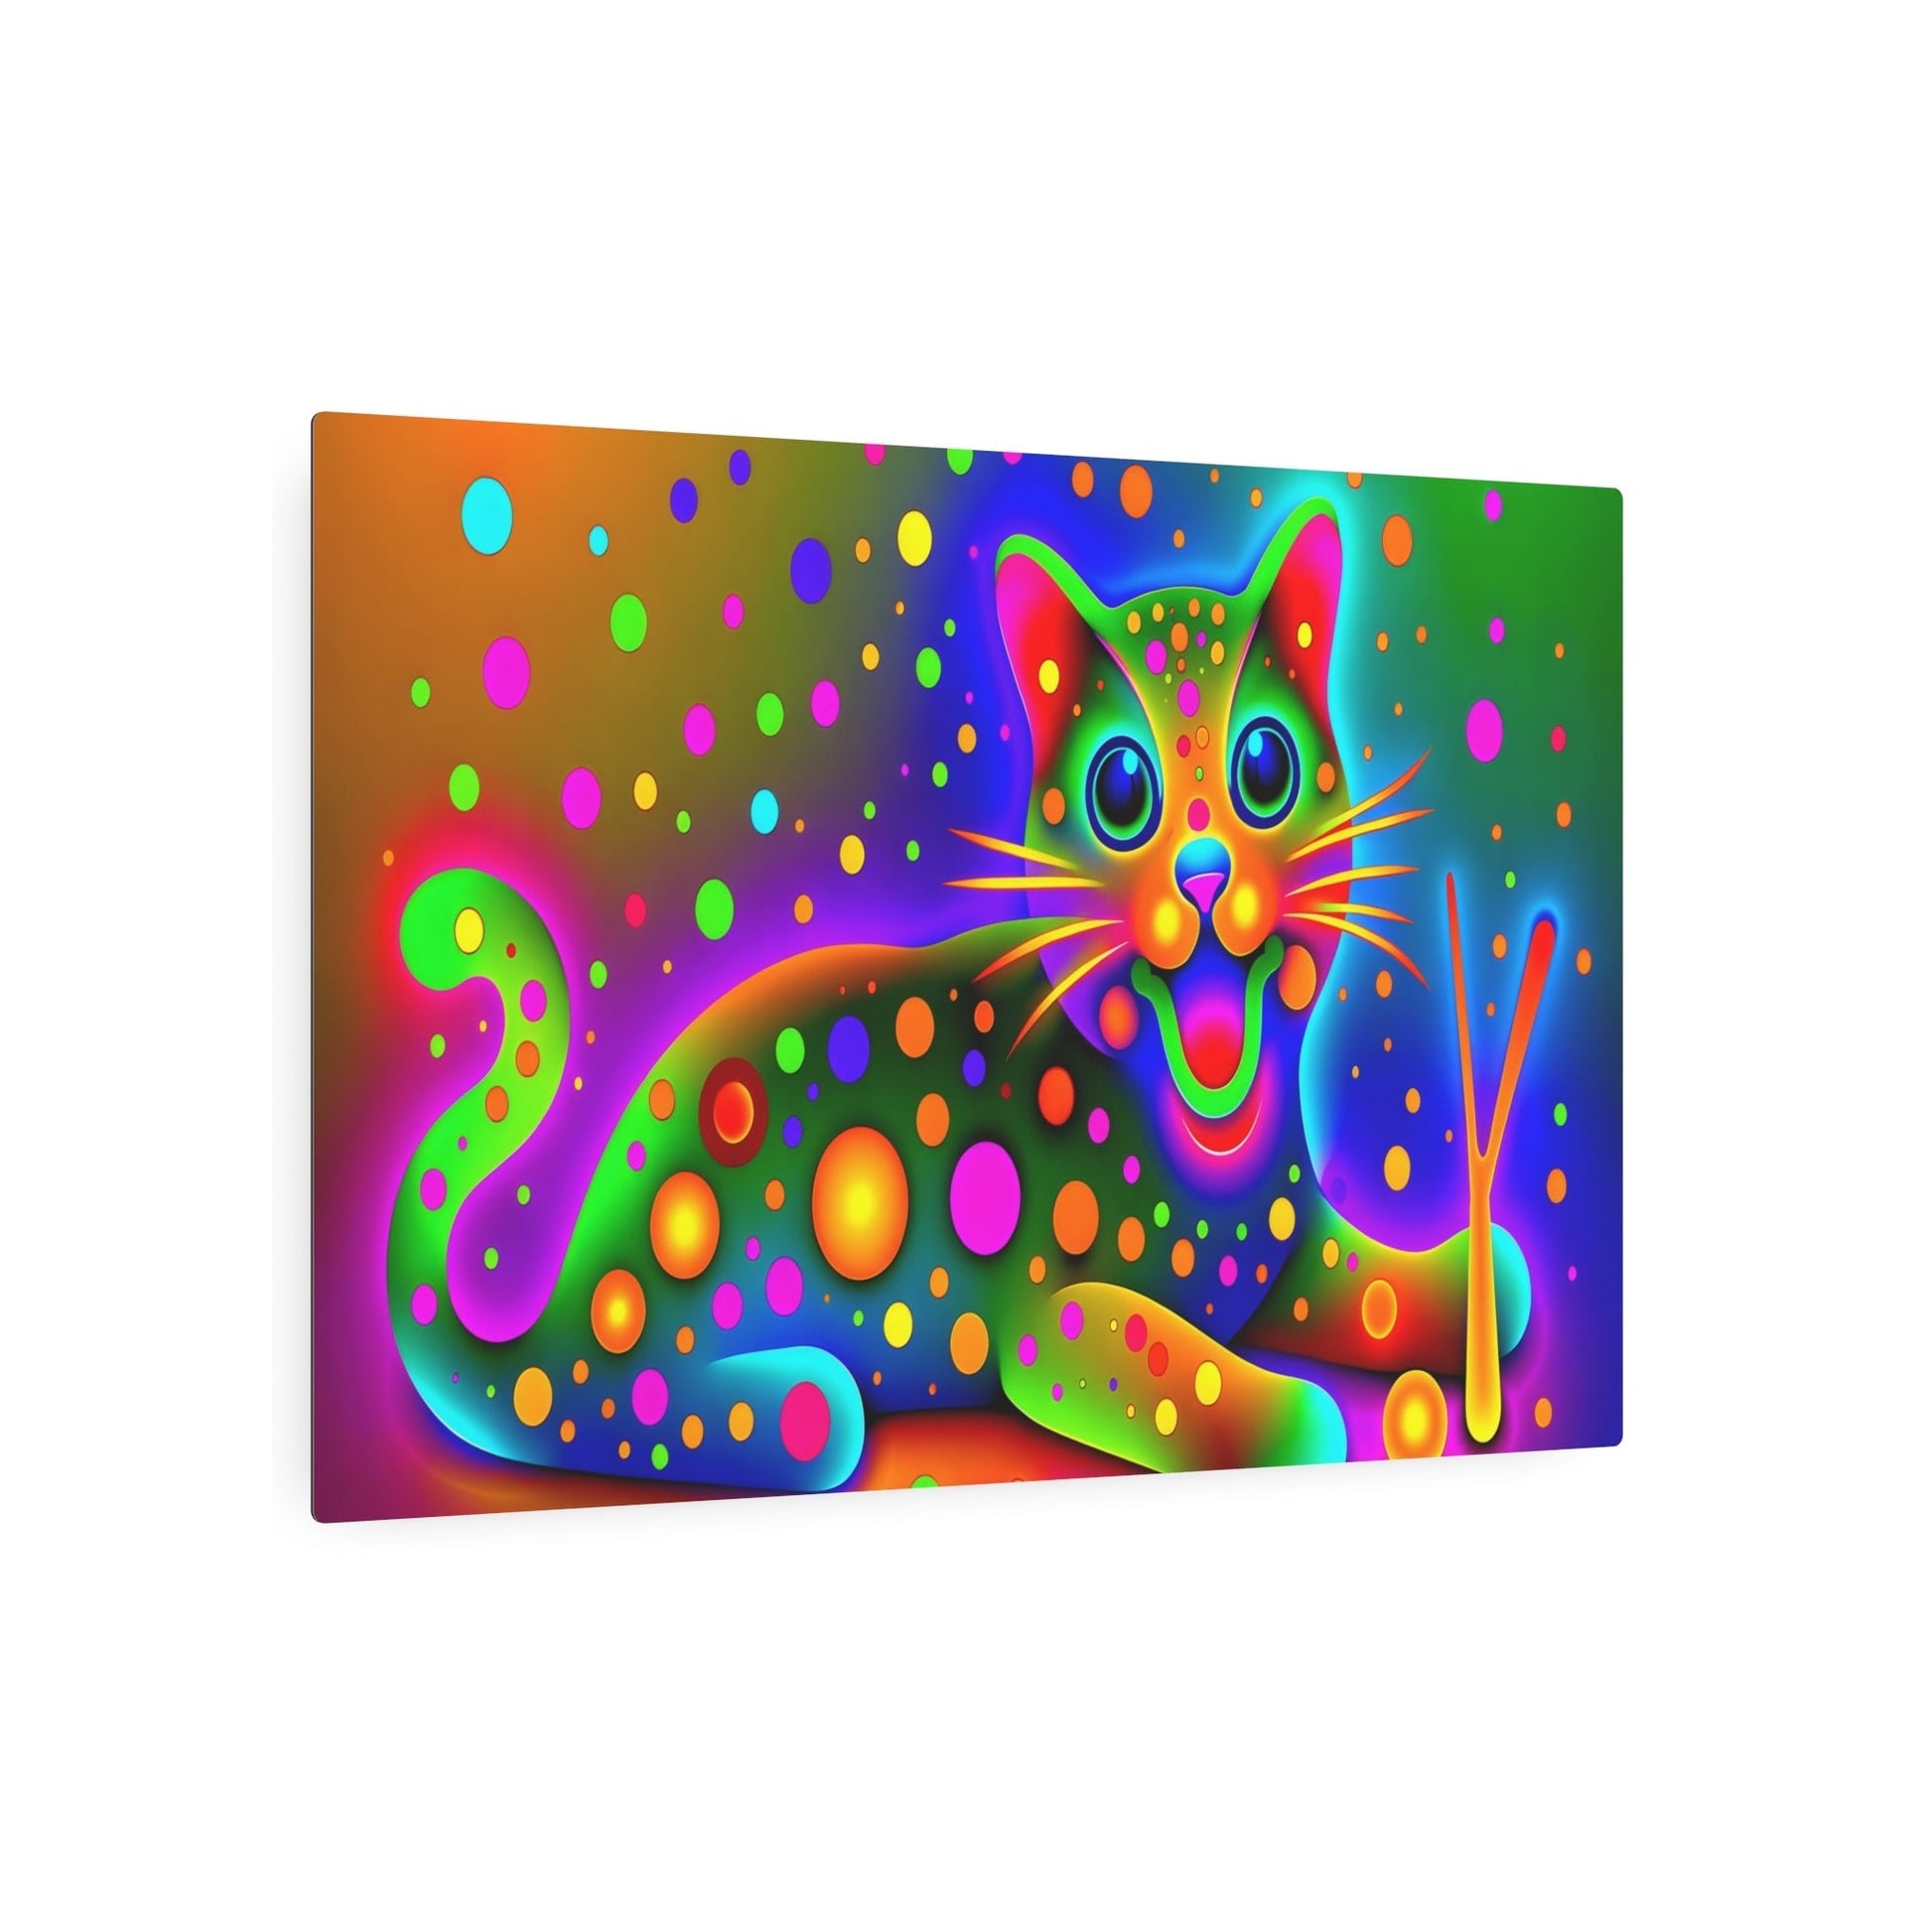 Metal Poster Art | "Vibrant Neon Digital Art: Whimsical Cat in Abstract Surreal Setting - Contemporary Style Glowing Artwork" - Metal Poster Art 36″ x 24″ (Horizontal) 0.12''